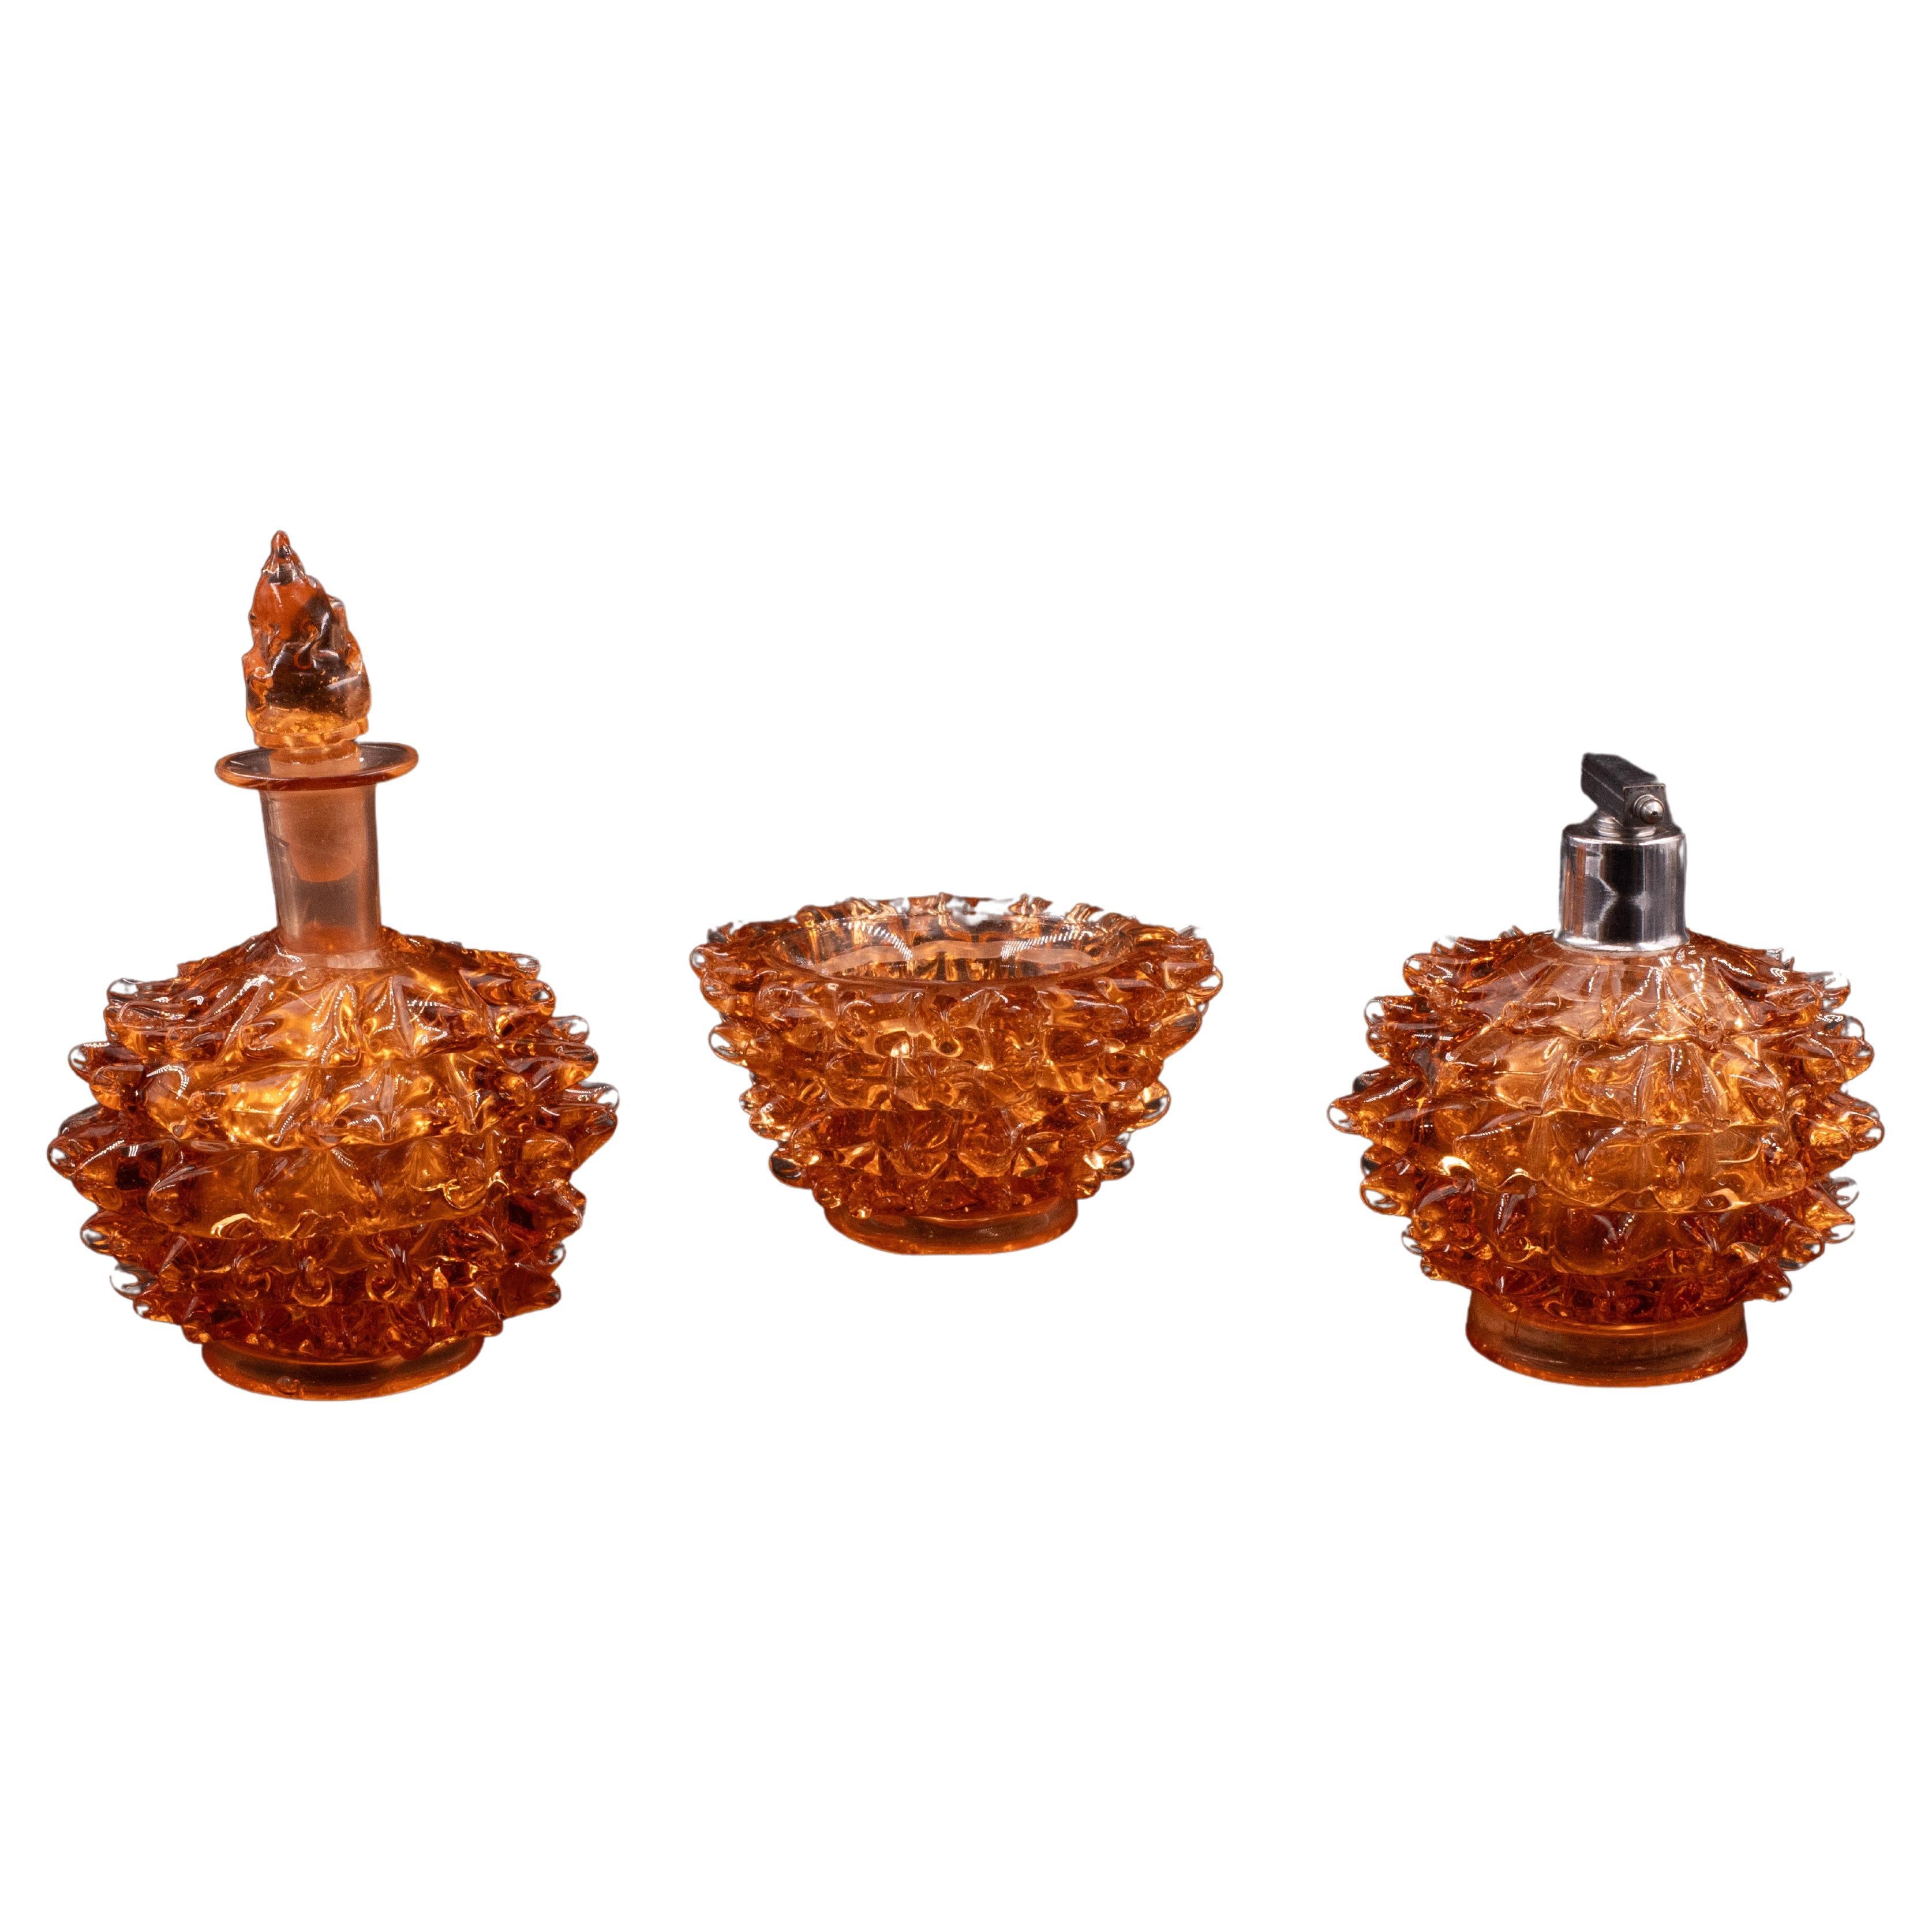 Rare Set of 3 Amber Rostrato Murano Glass Vases by Barovier & Toso, 1940s For Sale